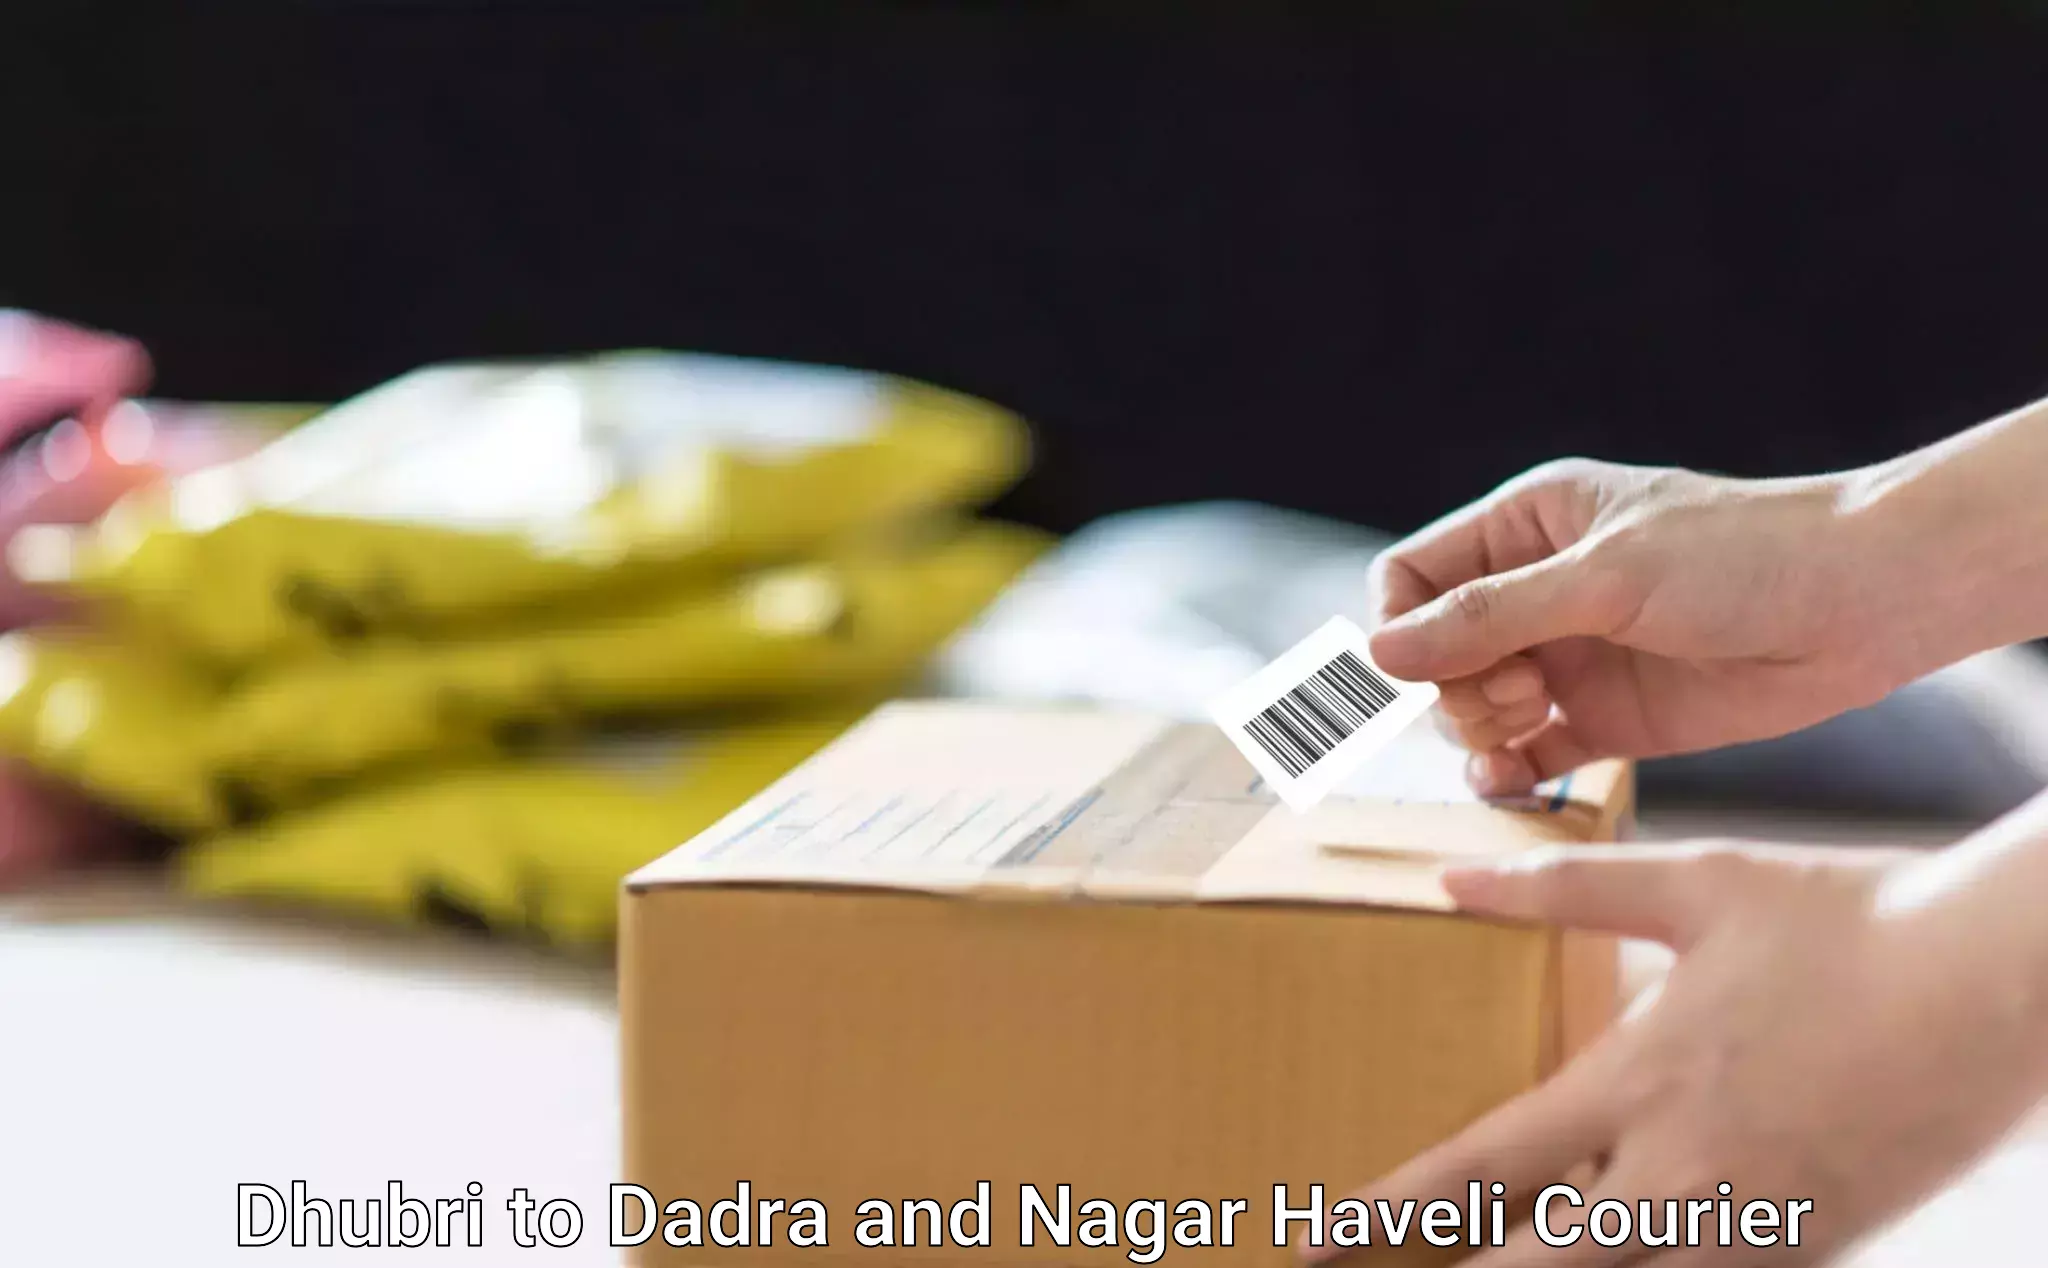 Customer-oriented courier services Dhubri to Dadra and Nagar Haveli